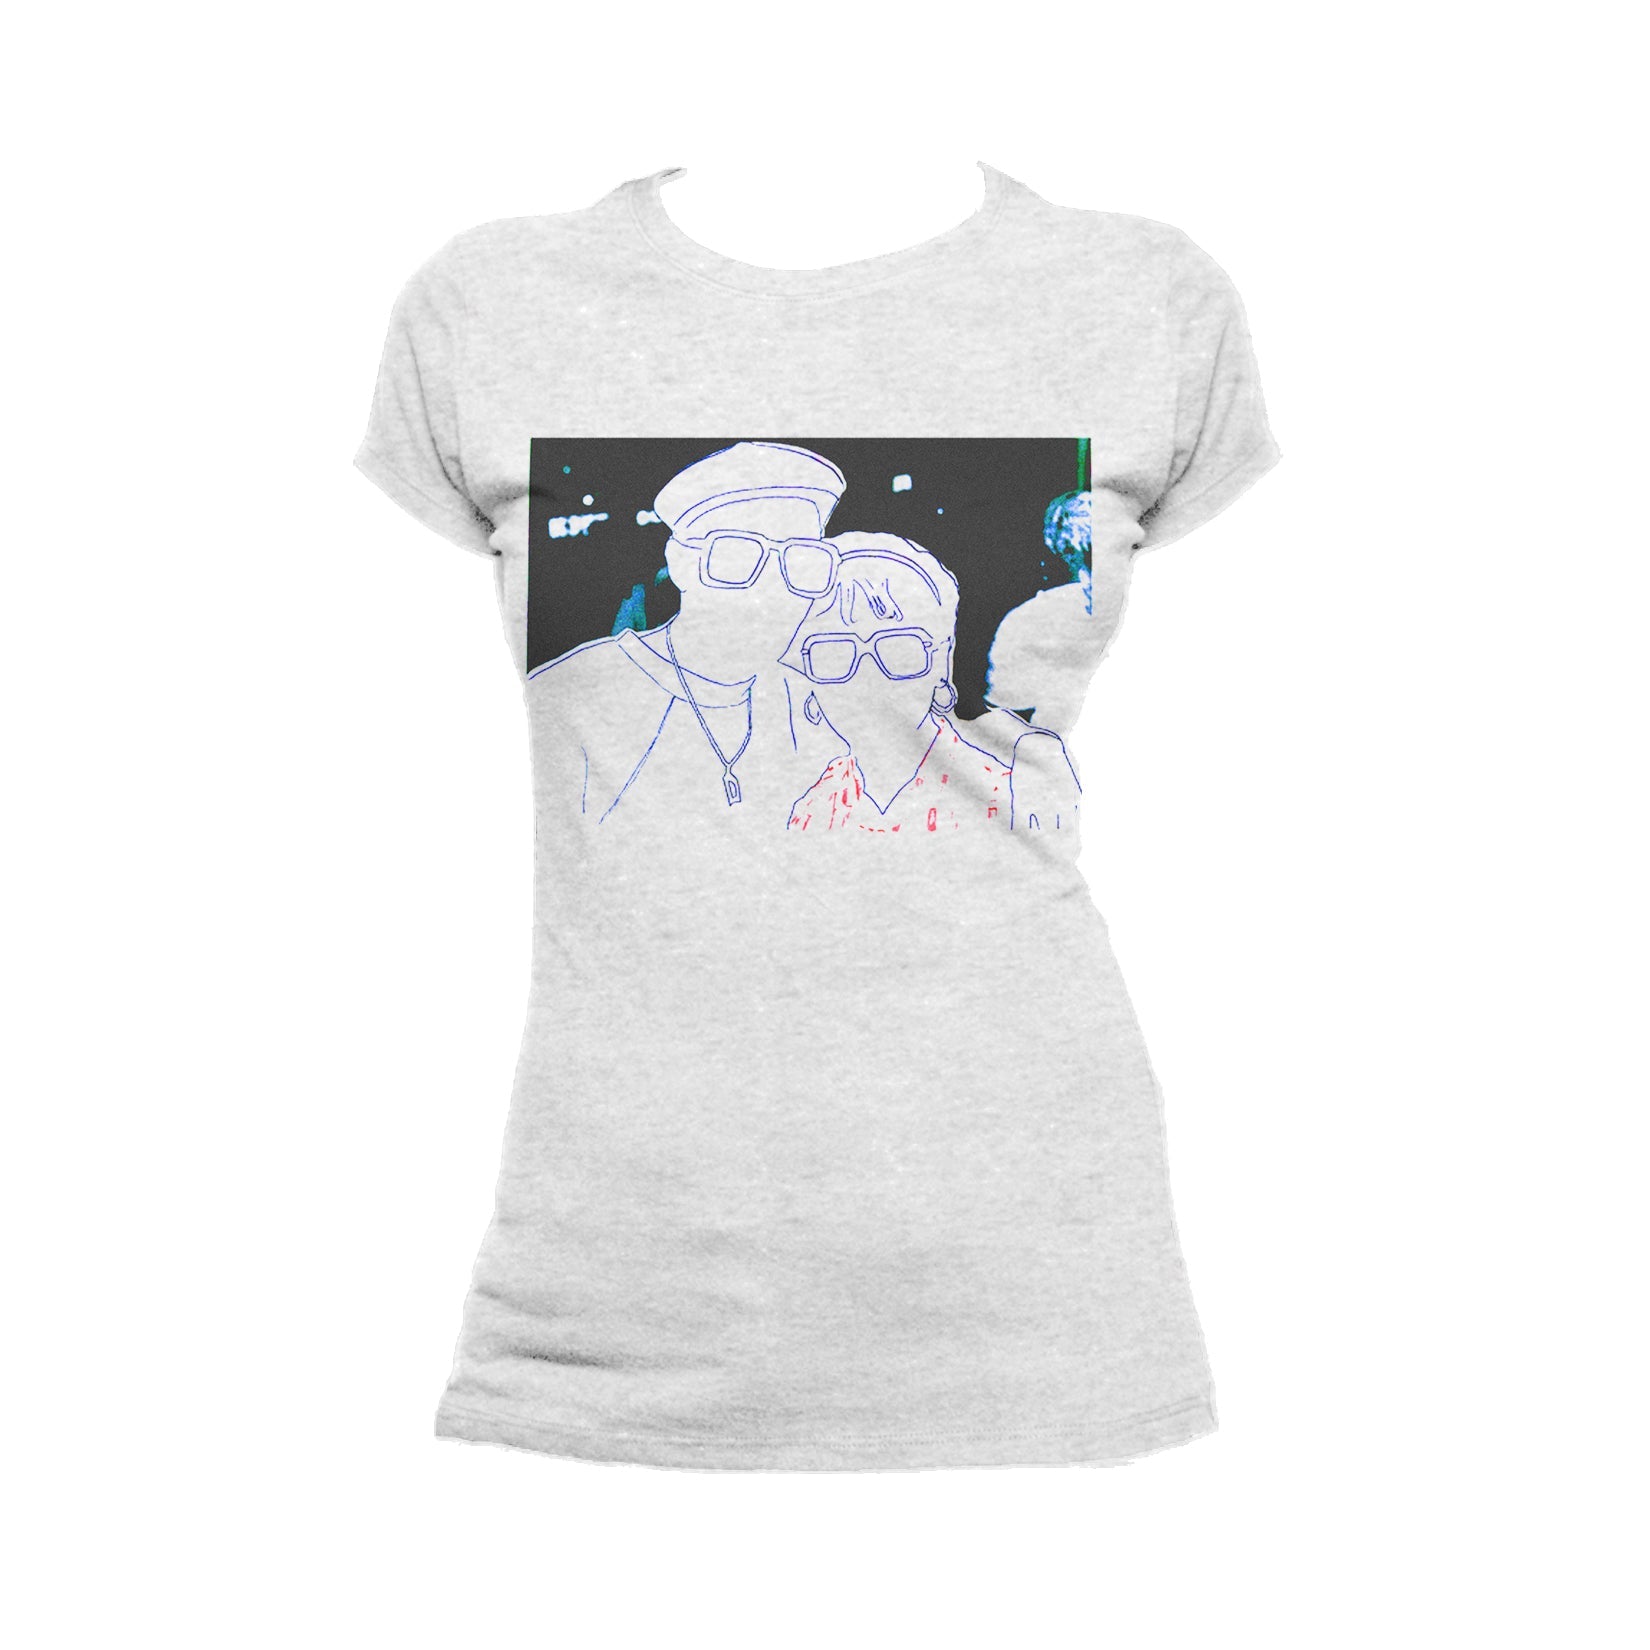 US Brand X Old's Kool Spec Amour Official Women's T-Shirt ()